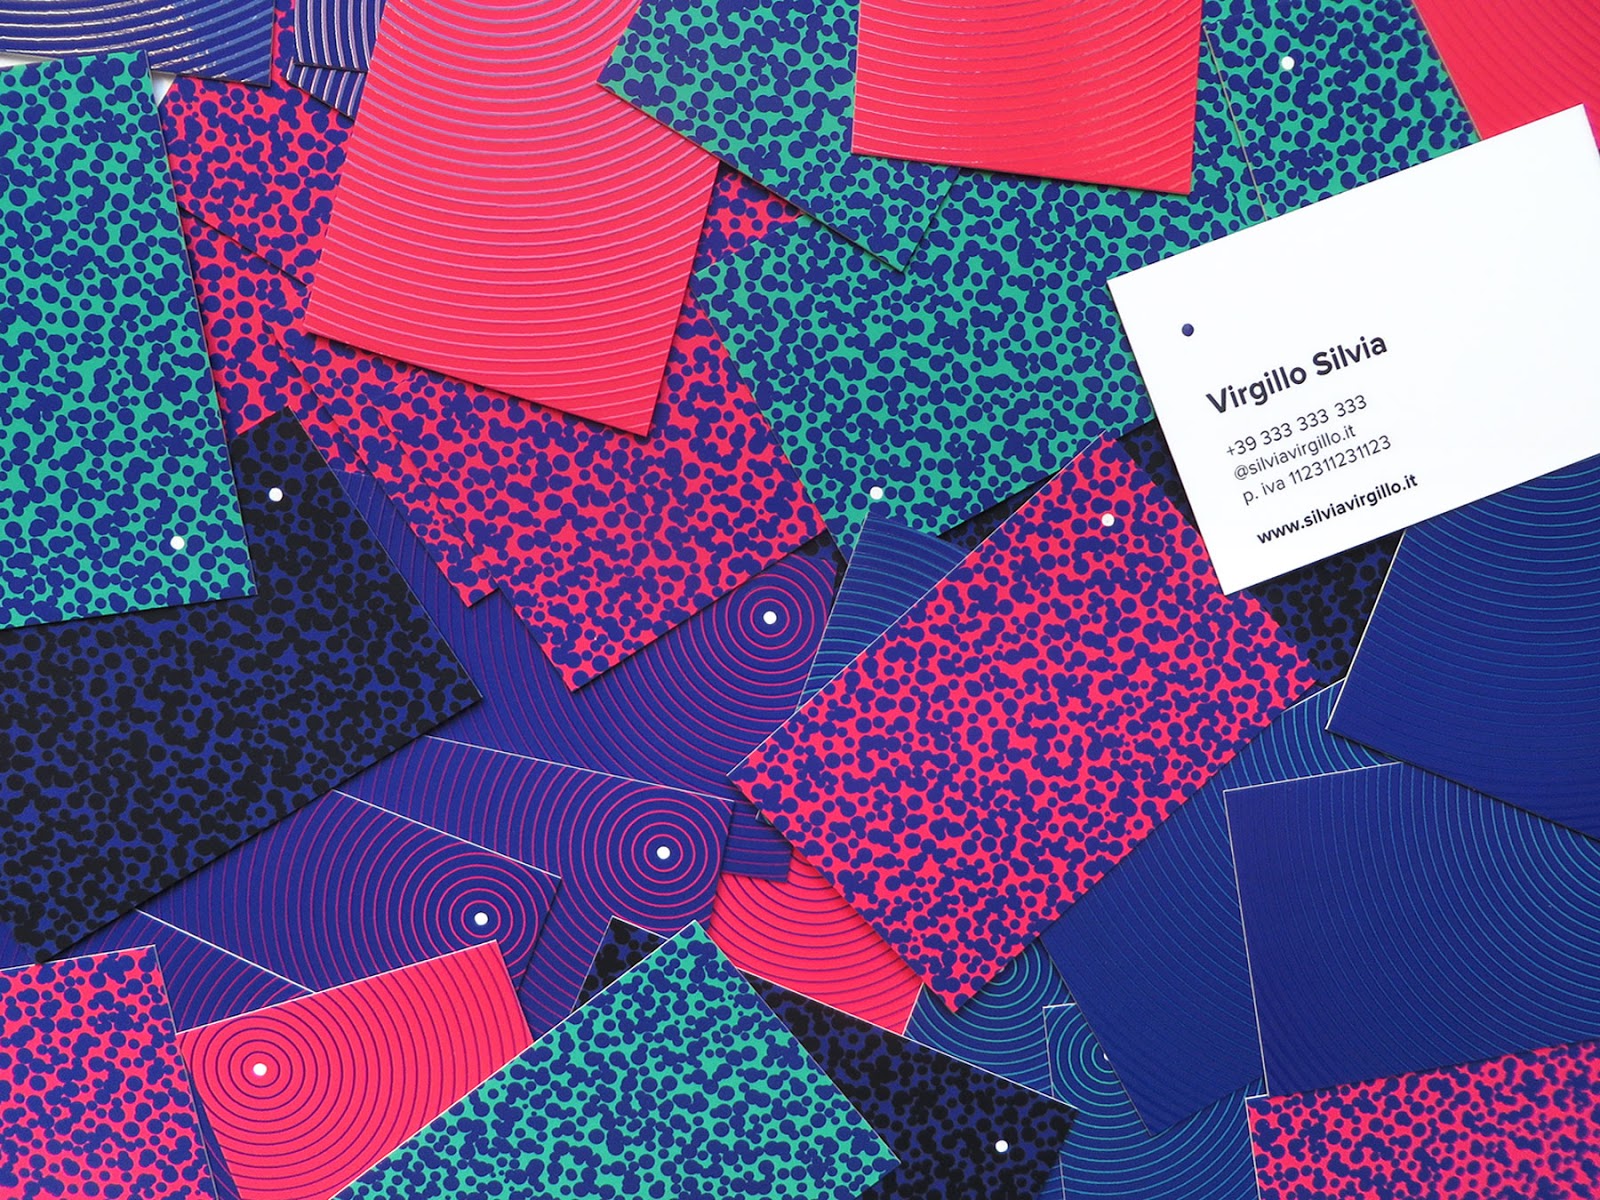 Virgillo Silvia by Punctuale business cards